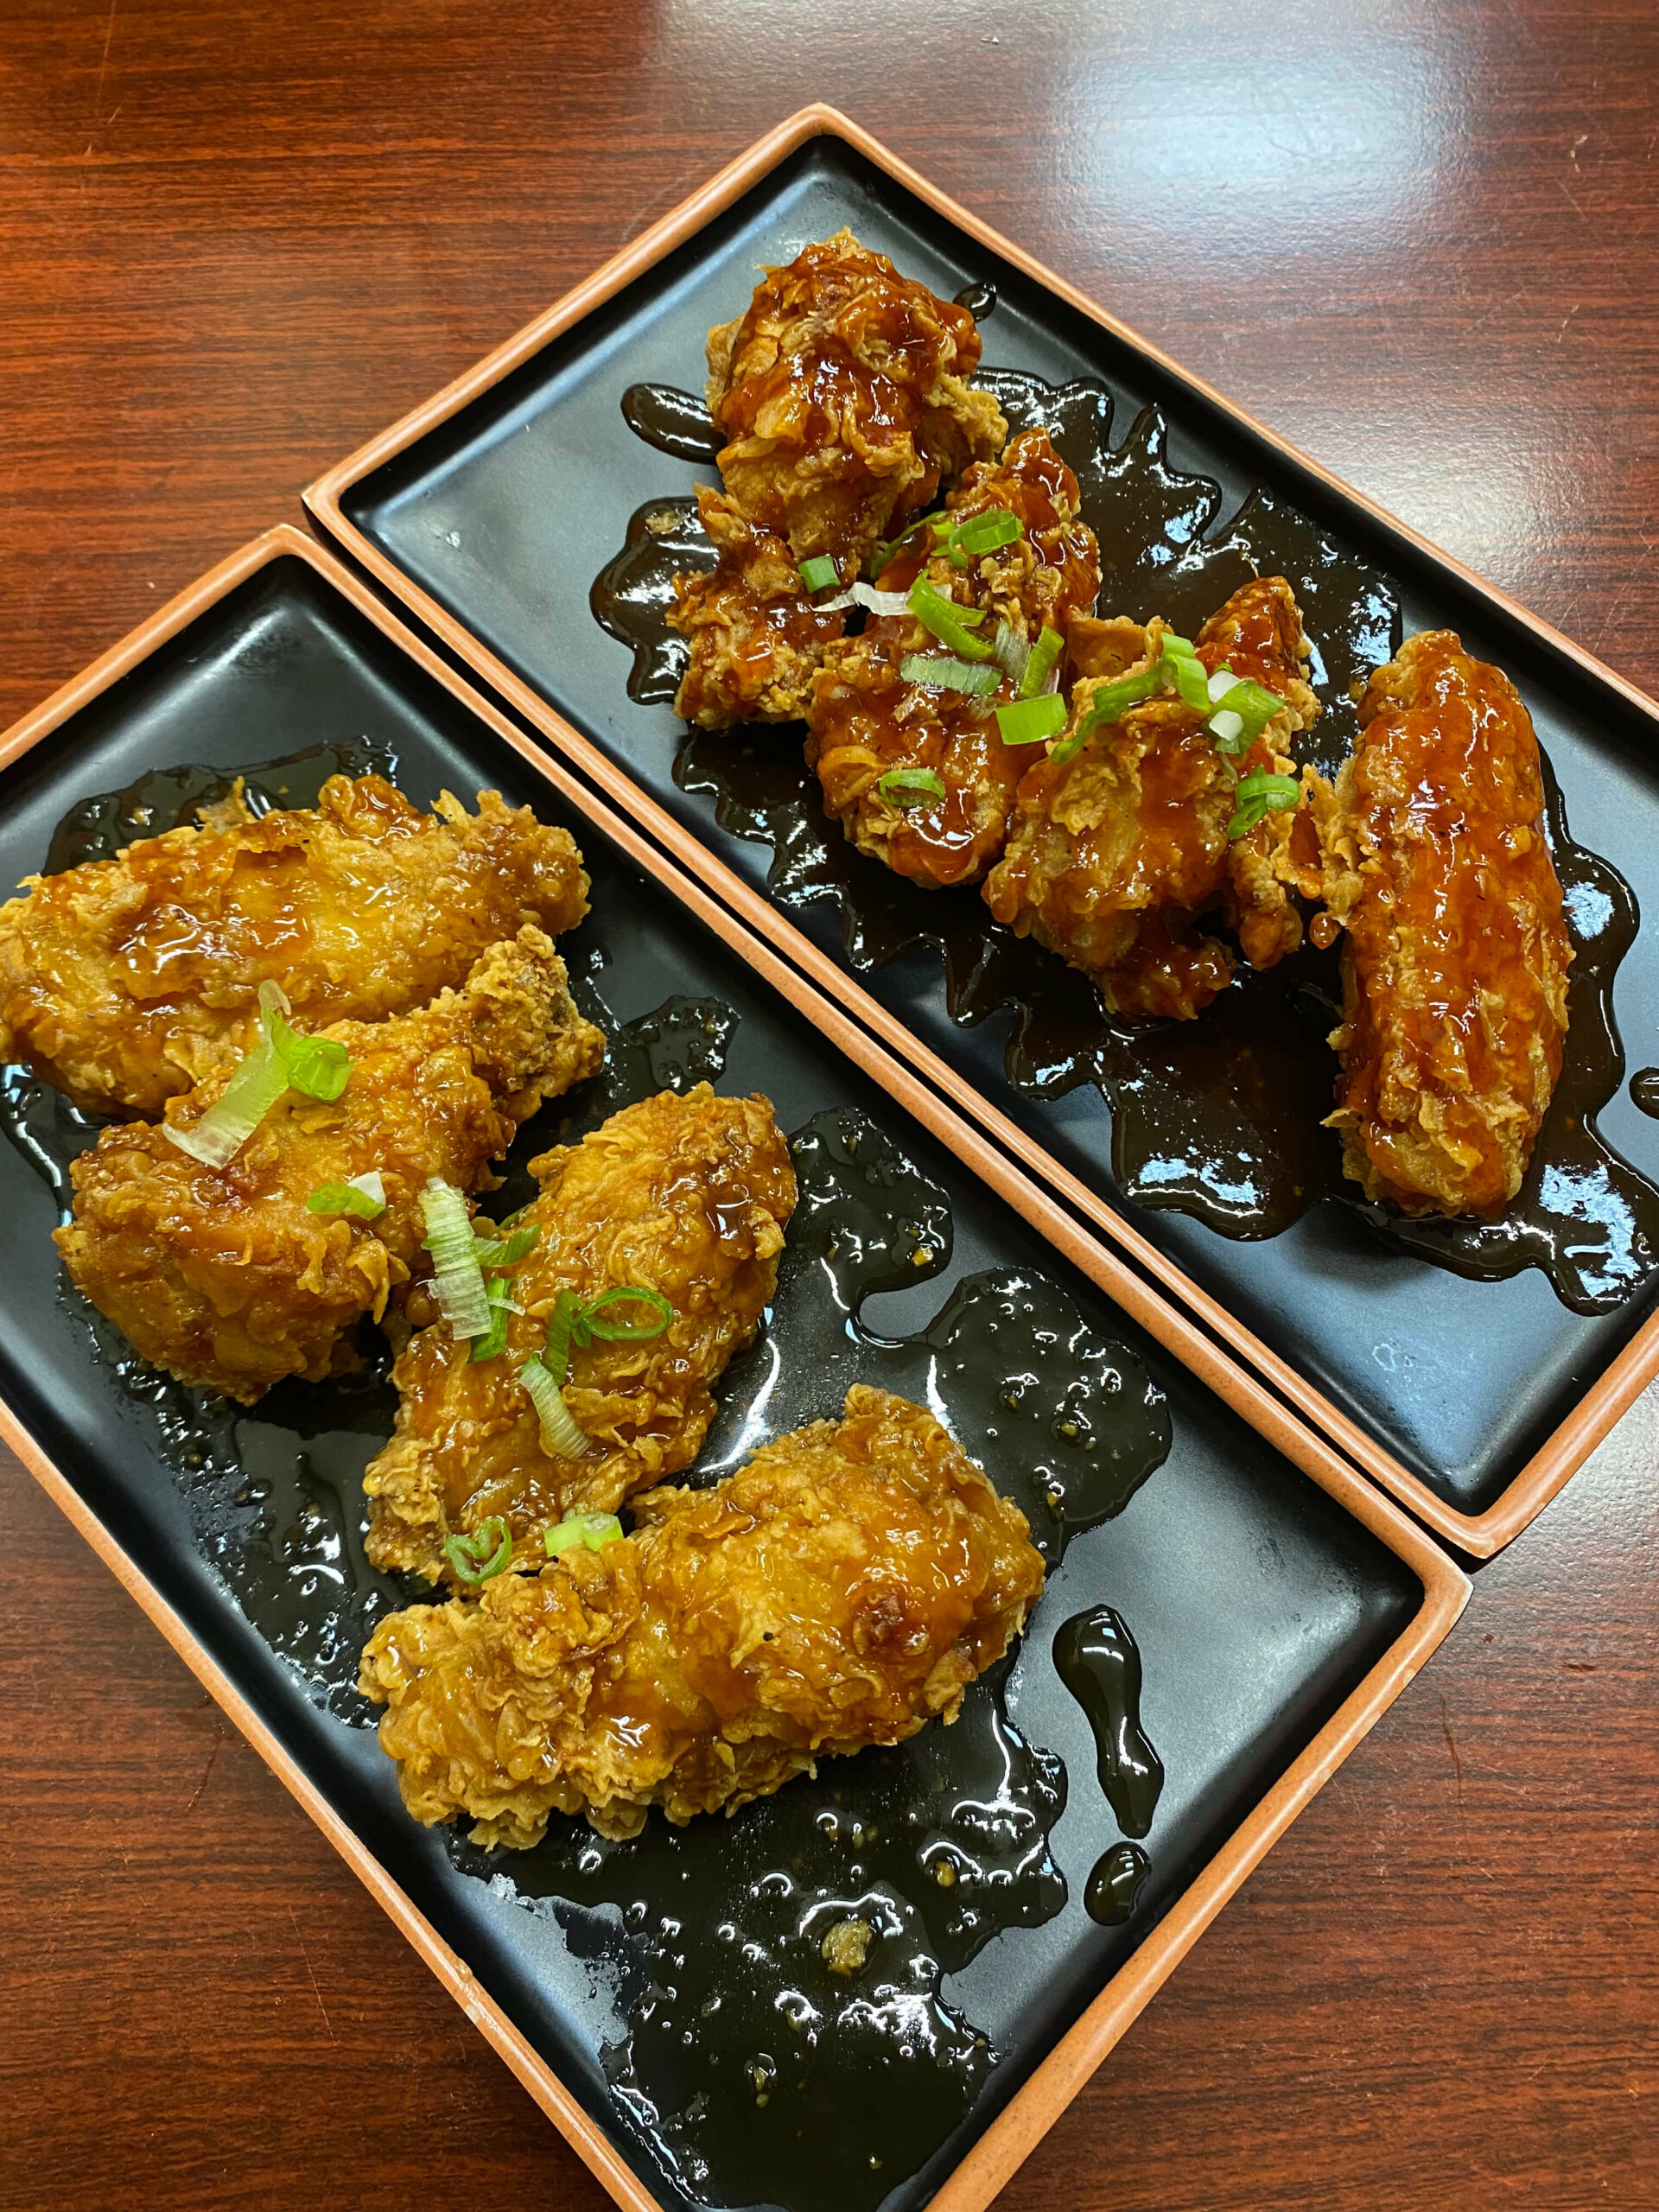 Two plates of Korean Fried Chicken, one with Mama's Spicy Korean Hot Sauce and one with Sweet Garlic Sauce.